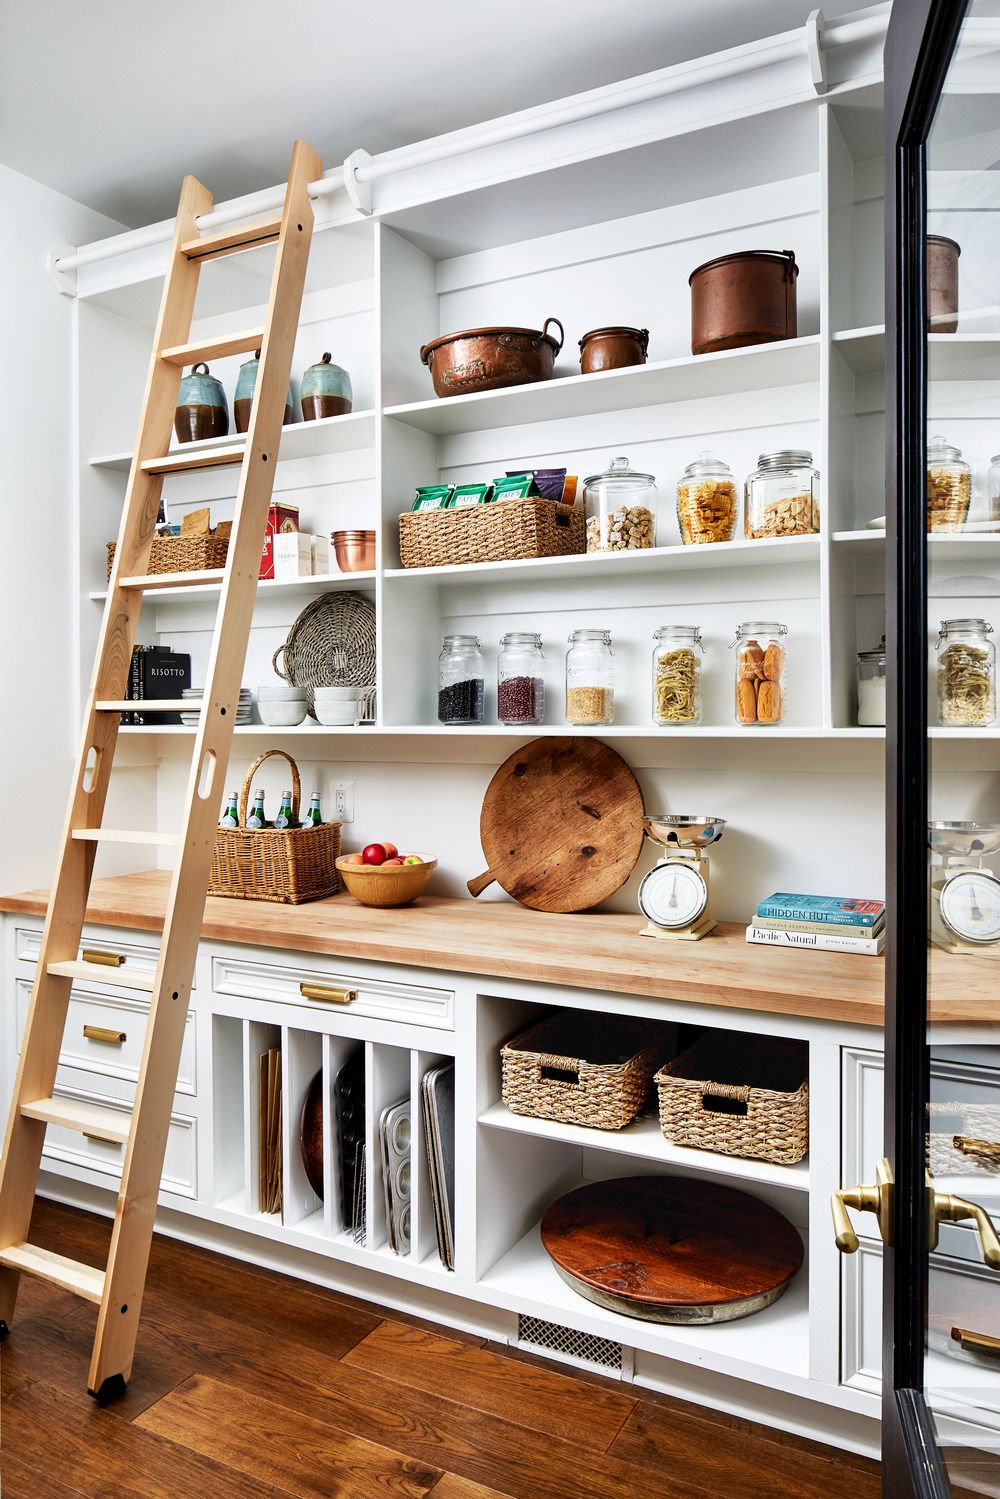 This Secret  Storefront Is Hiding a Bunch of Genius Kitchen Gadgets  You Need, and We Found 8 of the Best